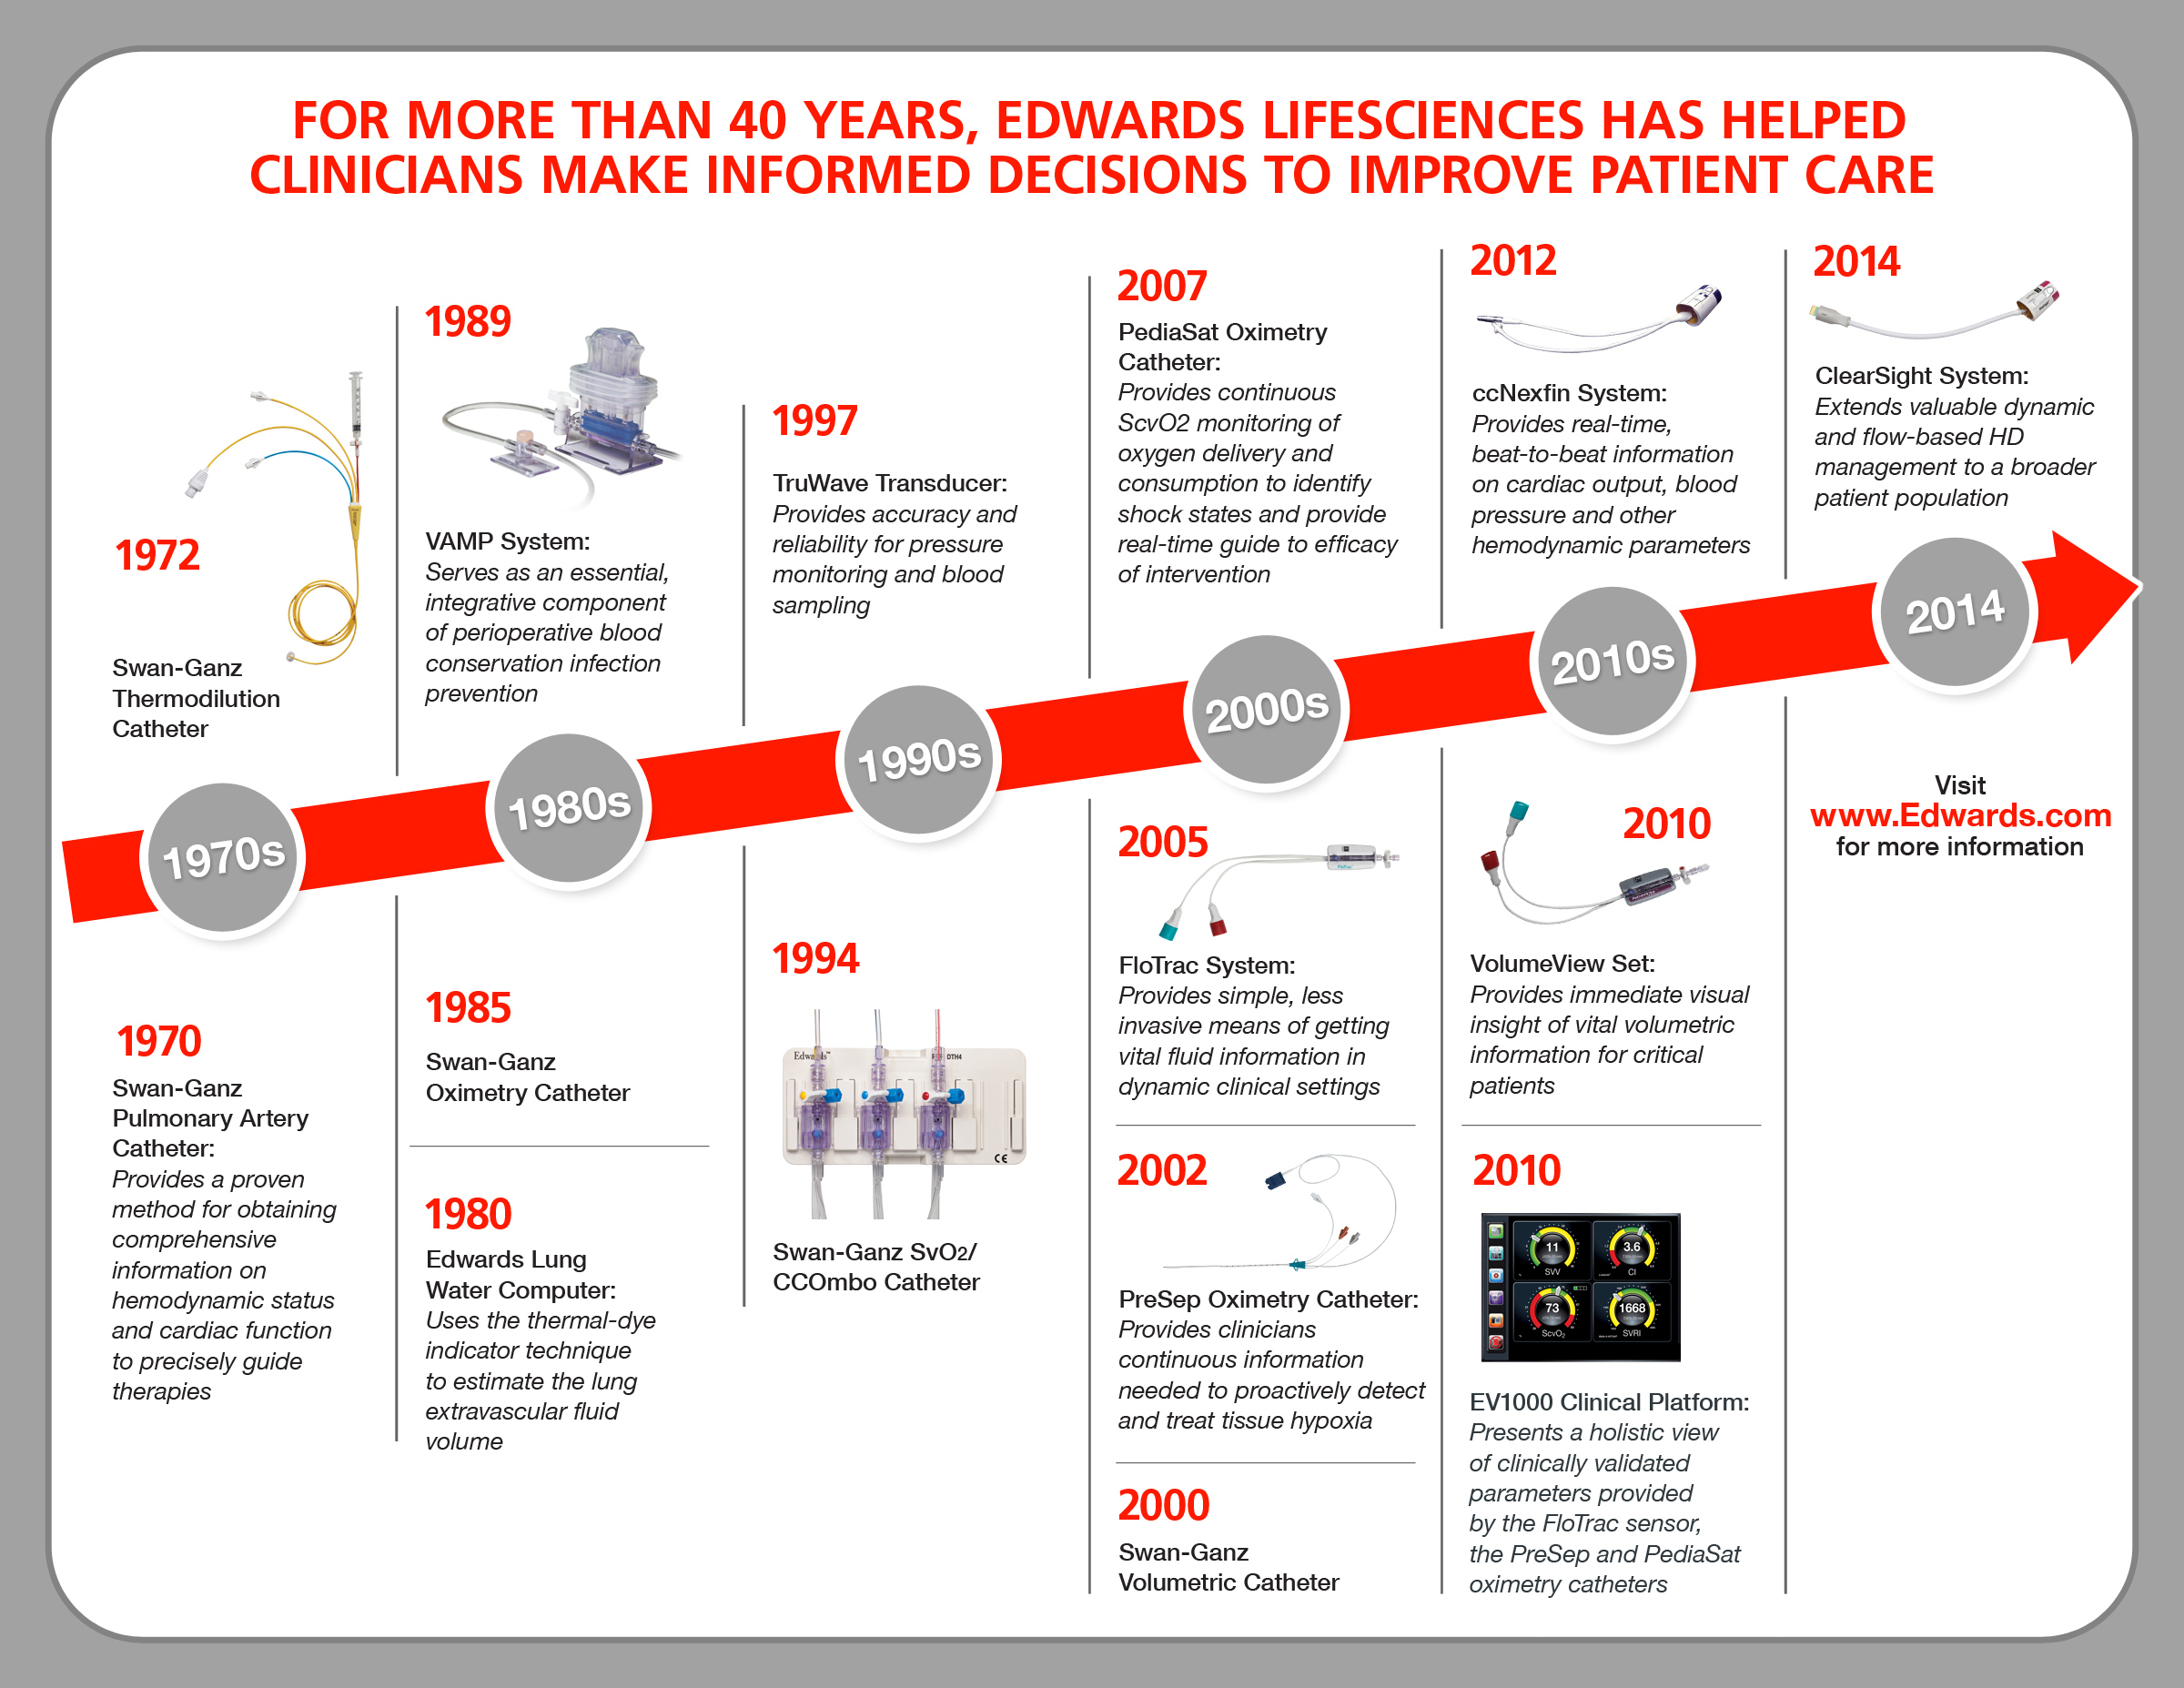 Edwards has a long history of partnering with clinicians to develop innovative technologies in the areas of critical care monitoring.